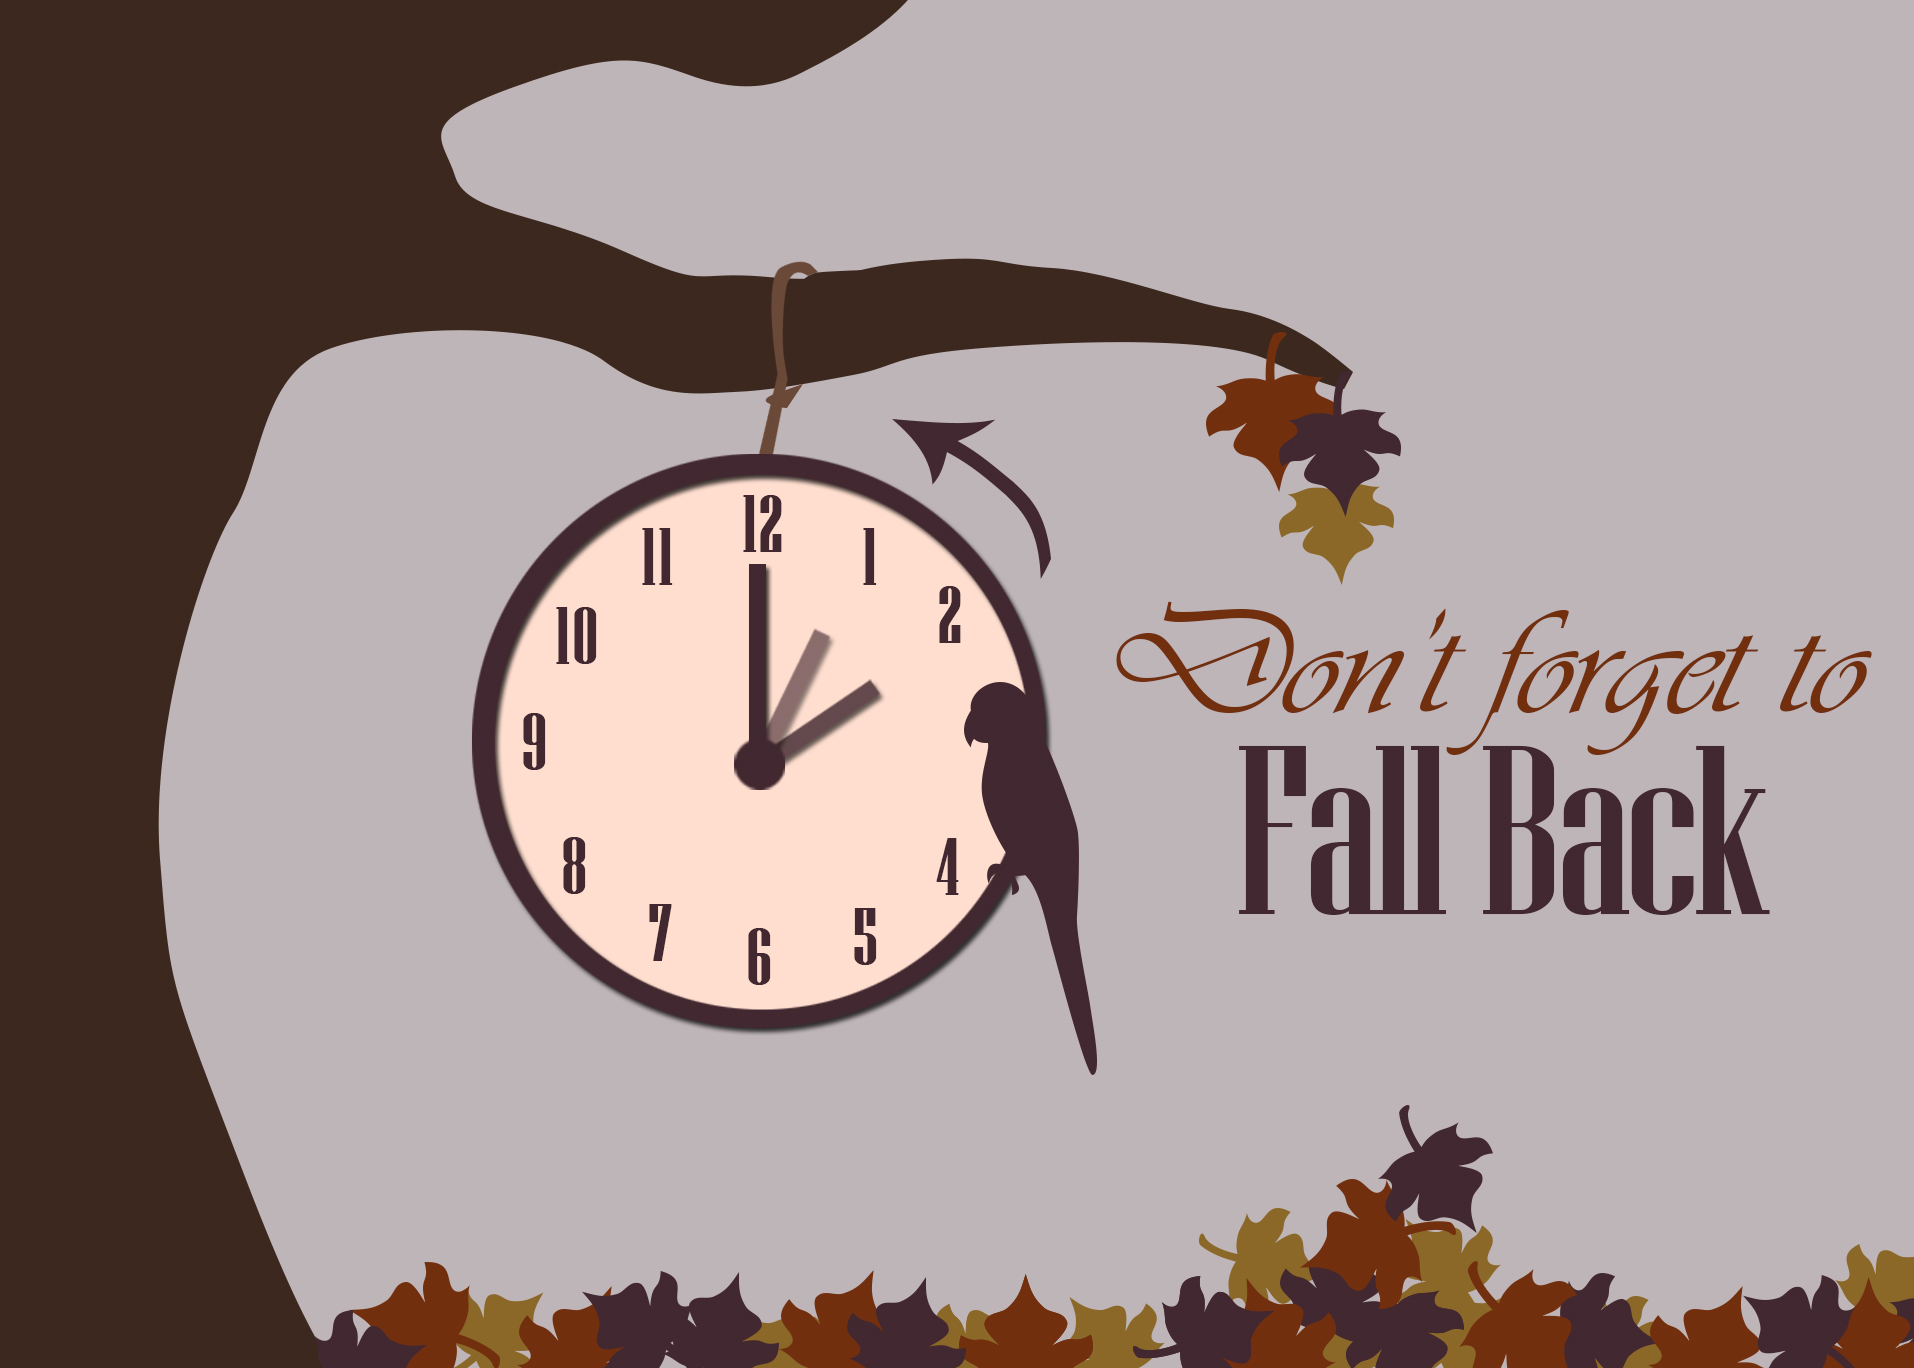 Don’t forget! Fall back this weekend with end of daylight saving time